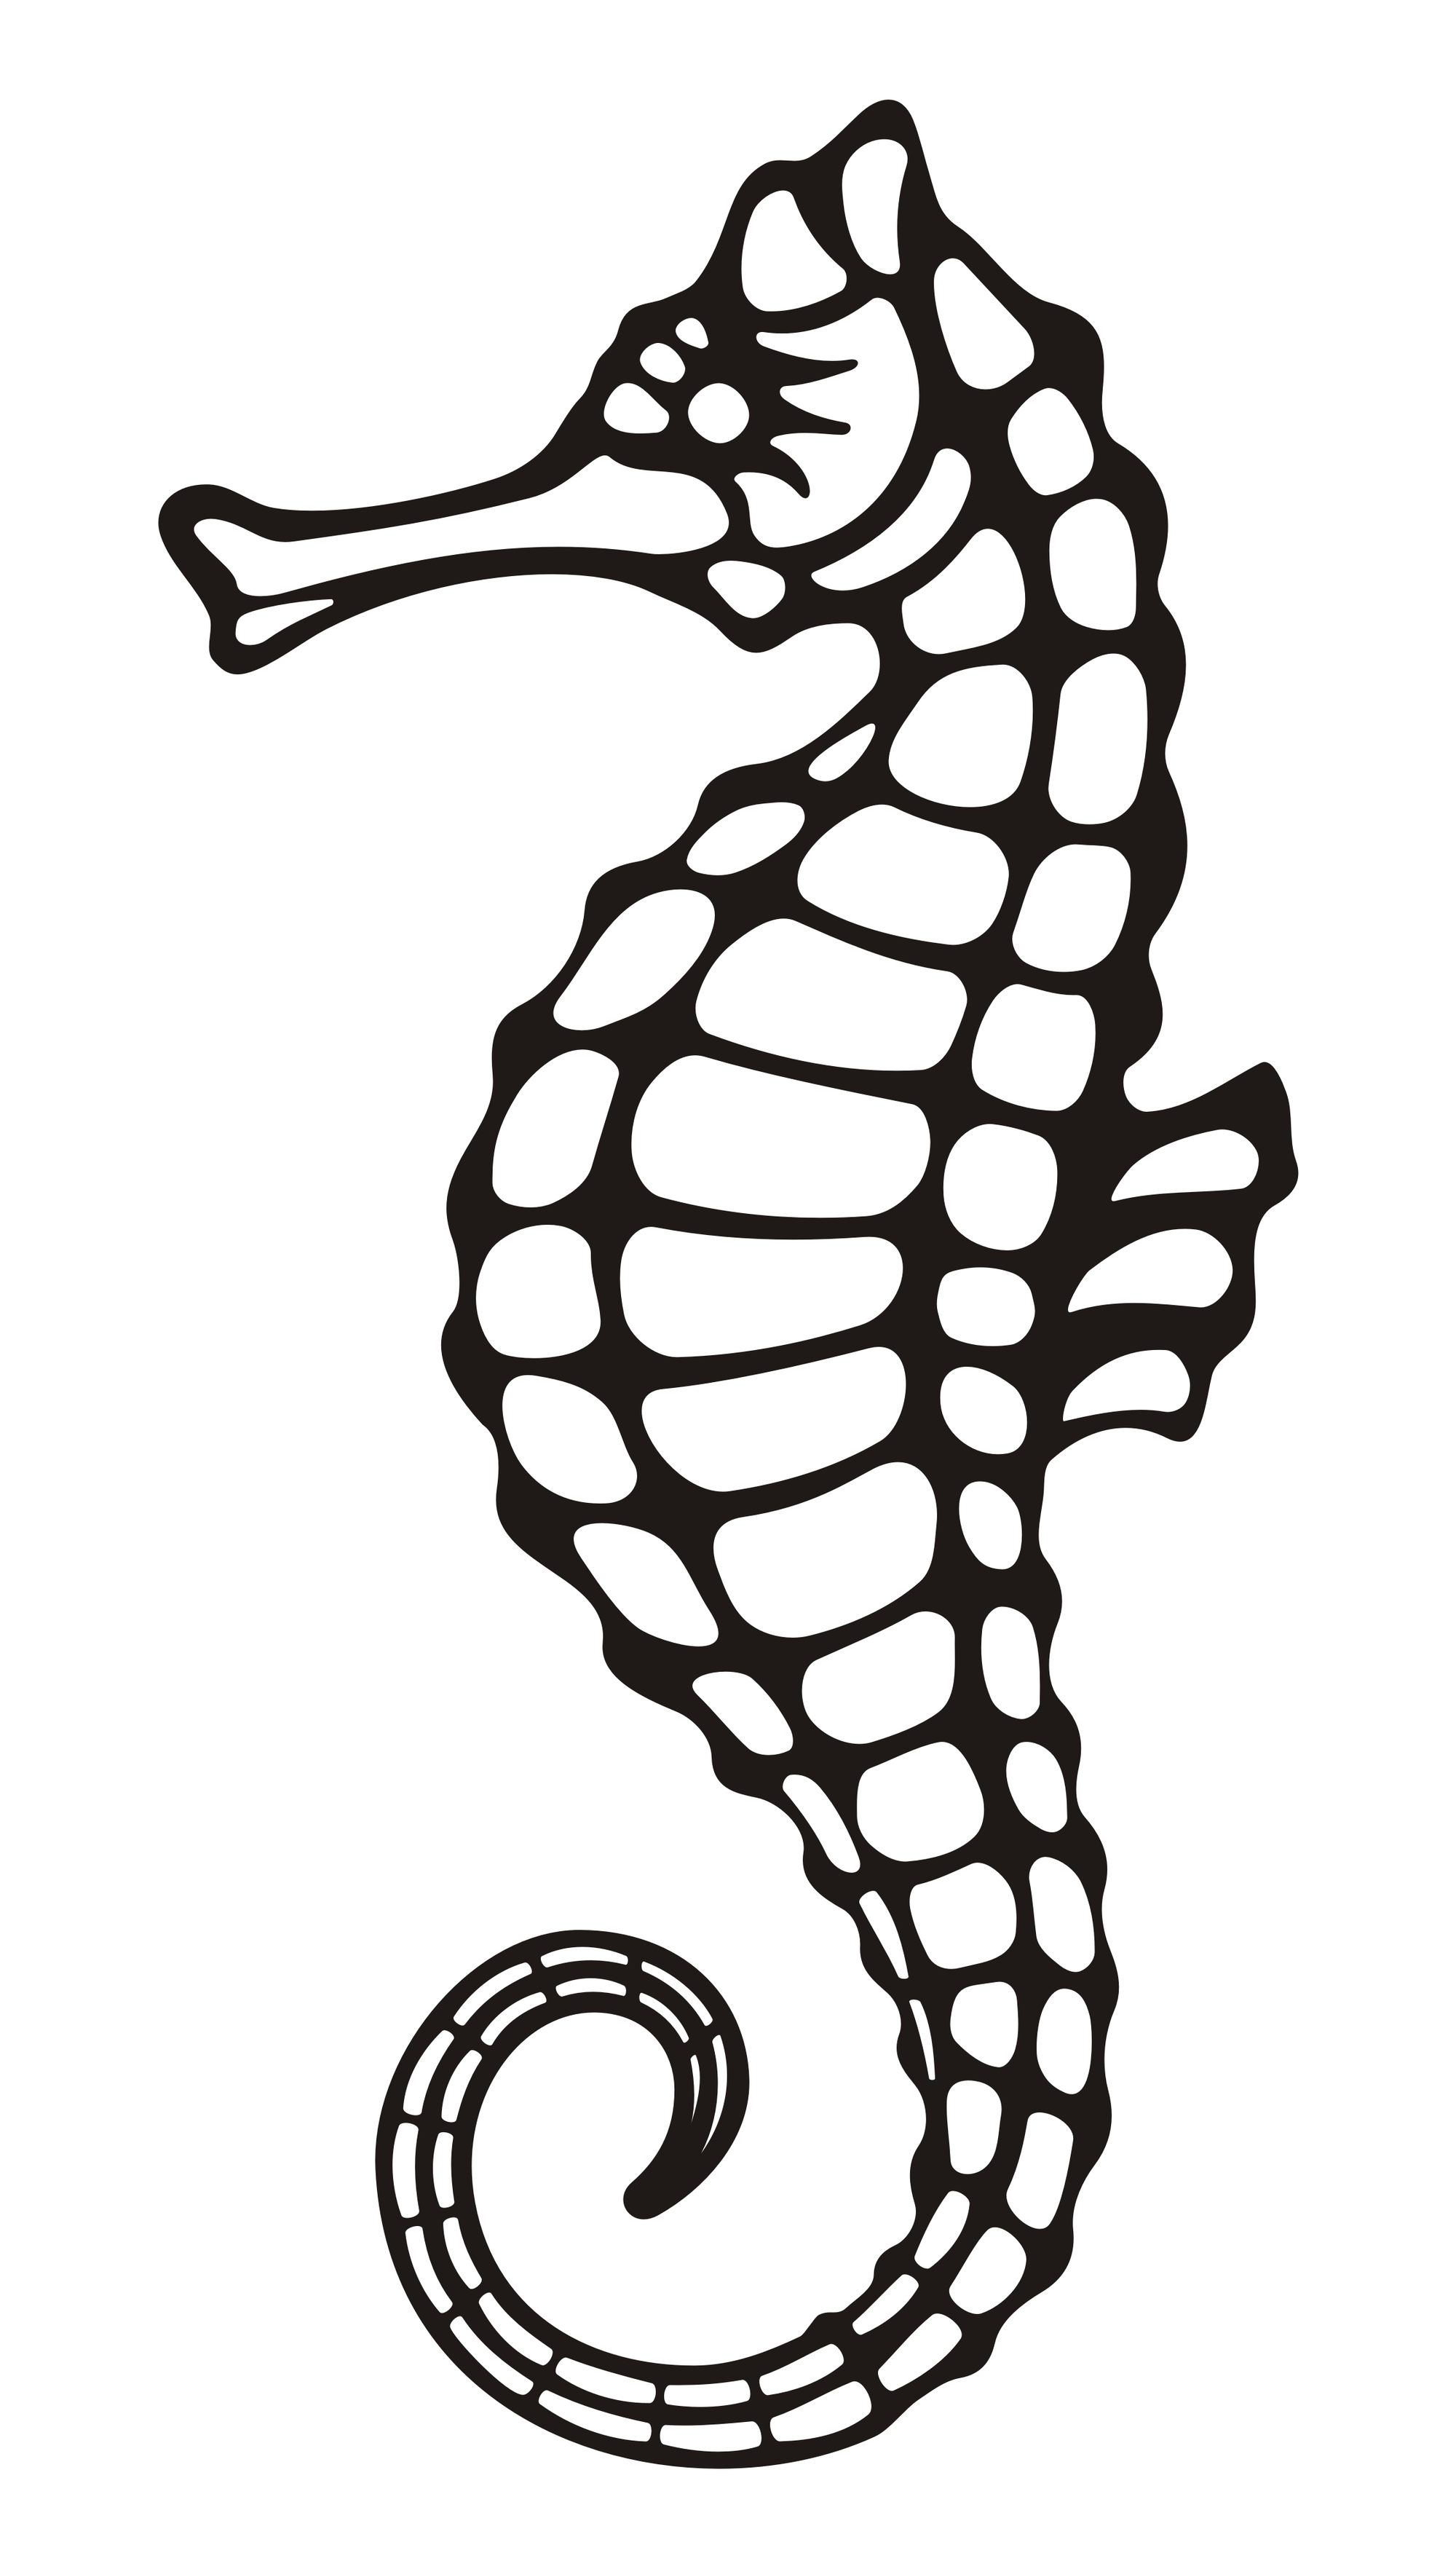 How Did the Seahorse Get its Shape? | PsiVid, Scientific American 